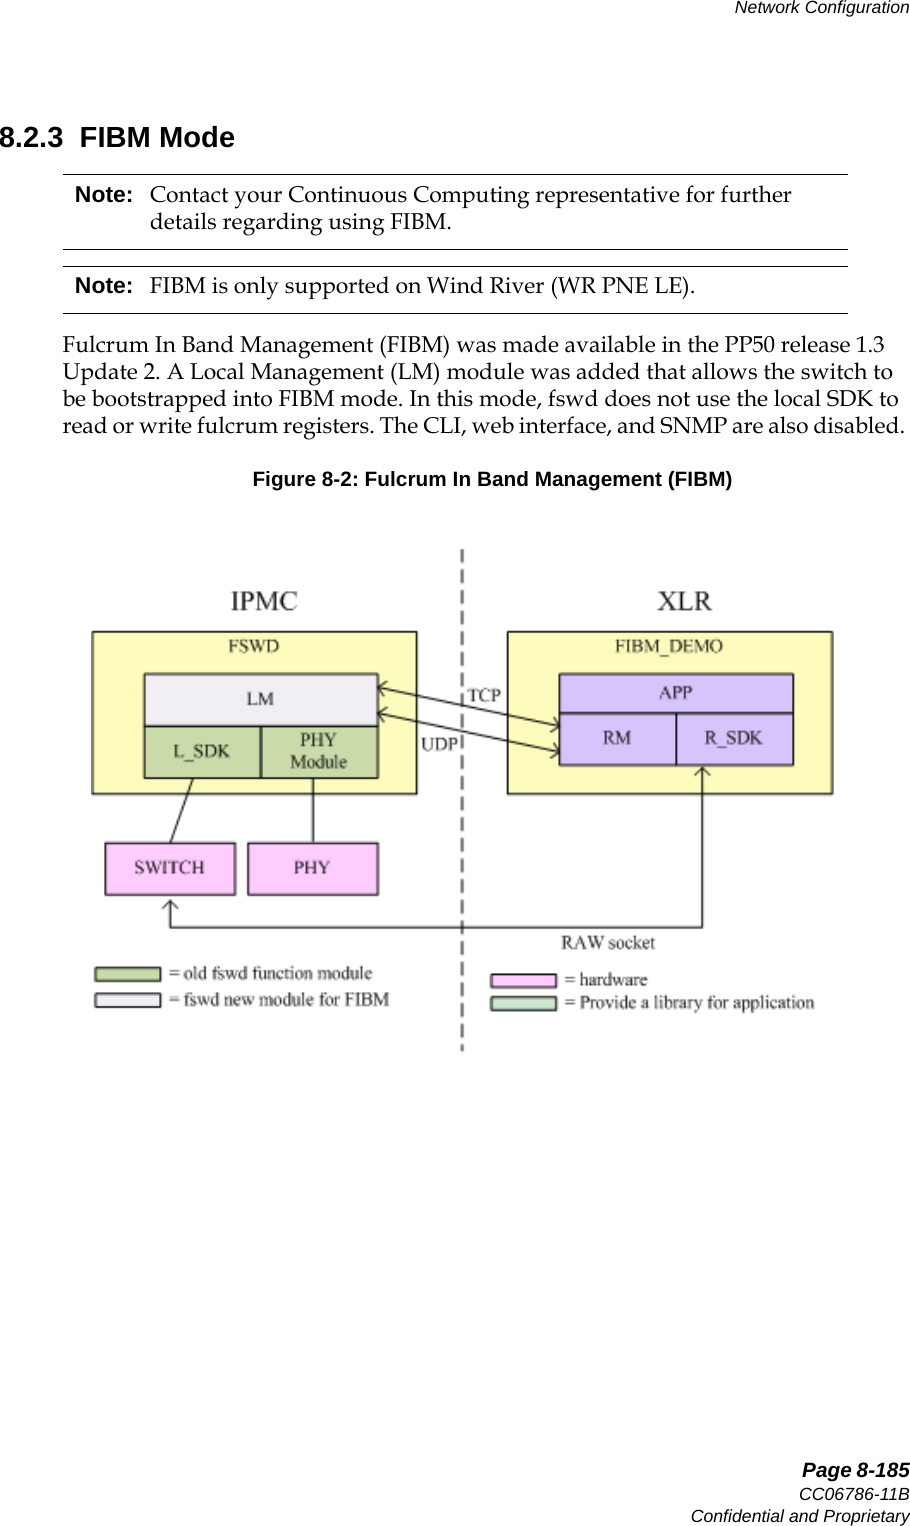   Page 8-185CC06786-11BConfidential and ProprietaryNetwork Configuration14ABABPreliminary8.2.3  FIBM ModeFulcrum In Band Management (FIBM) was made available in the PP50 release 1.3 Update 2. A Local Management (LM) module was added that allows the switch to be bootstrapped into FIBM mode. In this mode, fswd does not use the local SDK to read or write fulcrum registers. The CLI, web interface, and SNMP are also disabled. Note: Contact your Continuous Computing representative for further details regarding using FIBM. Note: FIBM is only supported on Wind River (WR PNE LE).Figure 8-2: Fulcrum In Band Management (FIBM)